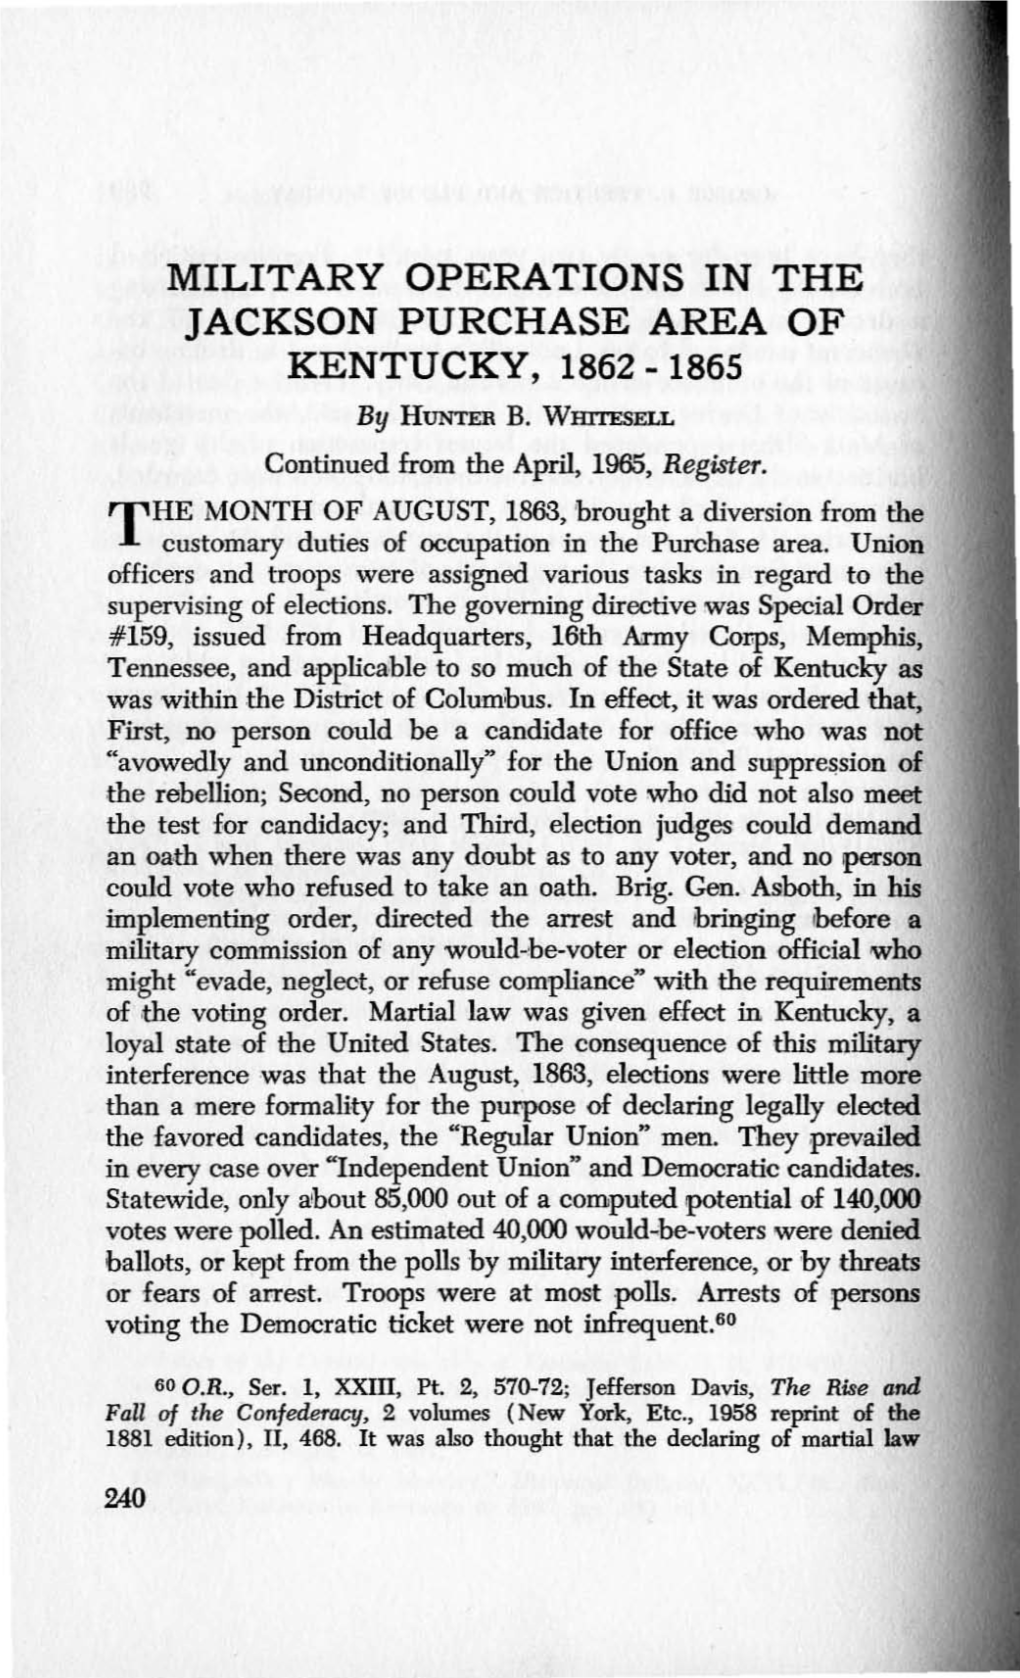 MILITARY OPERATIONS in the JACKSON PURCHASE AREA of KENTUCKY, 1862 - 1865 by HUNTER B